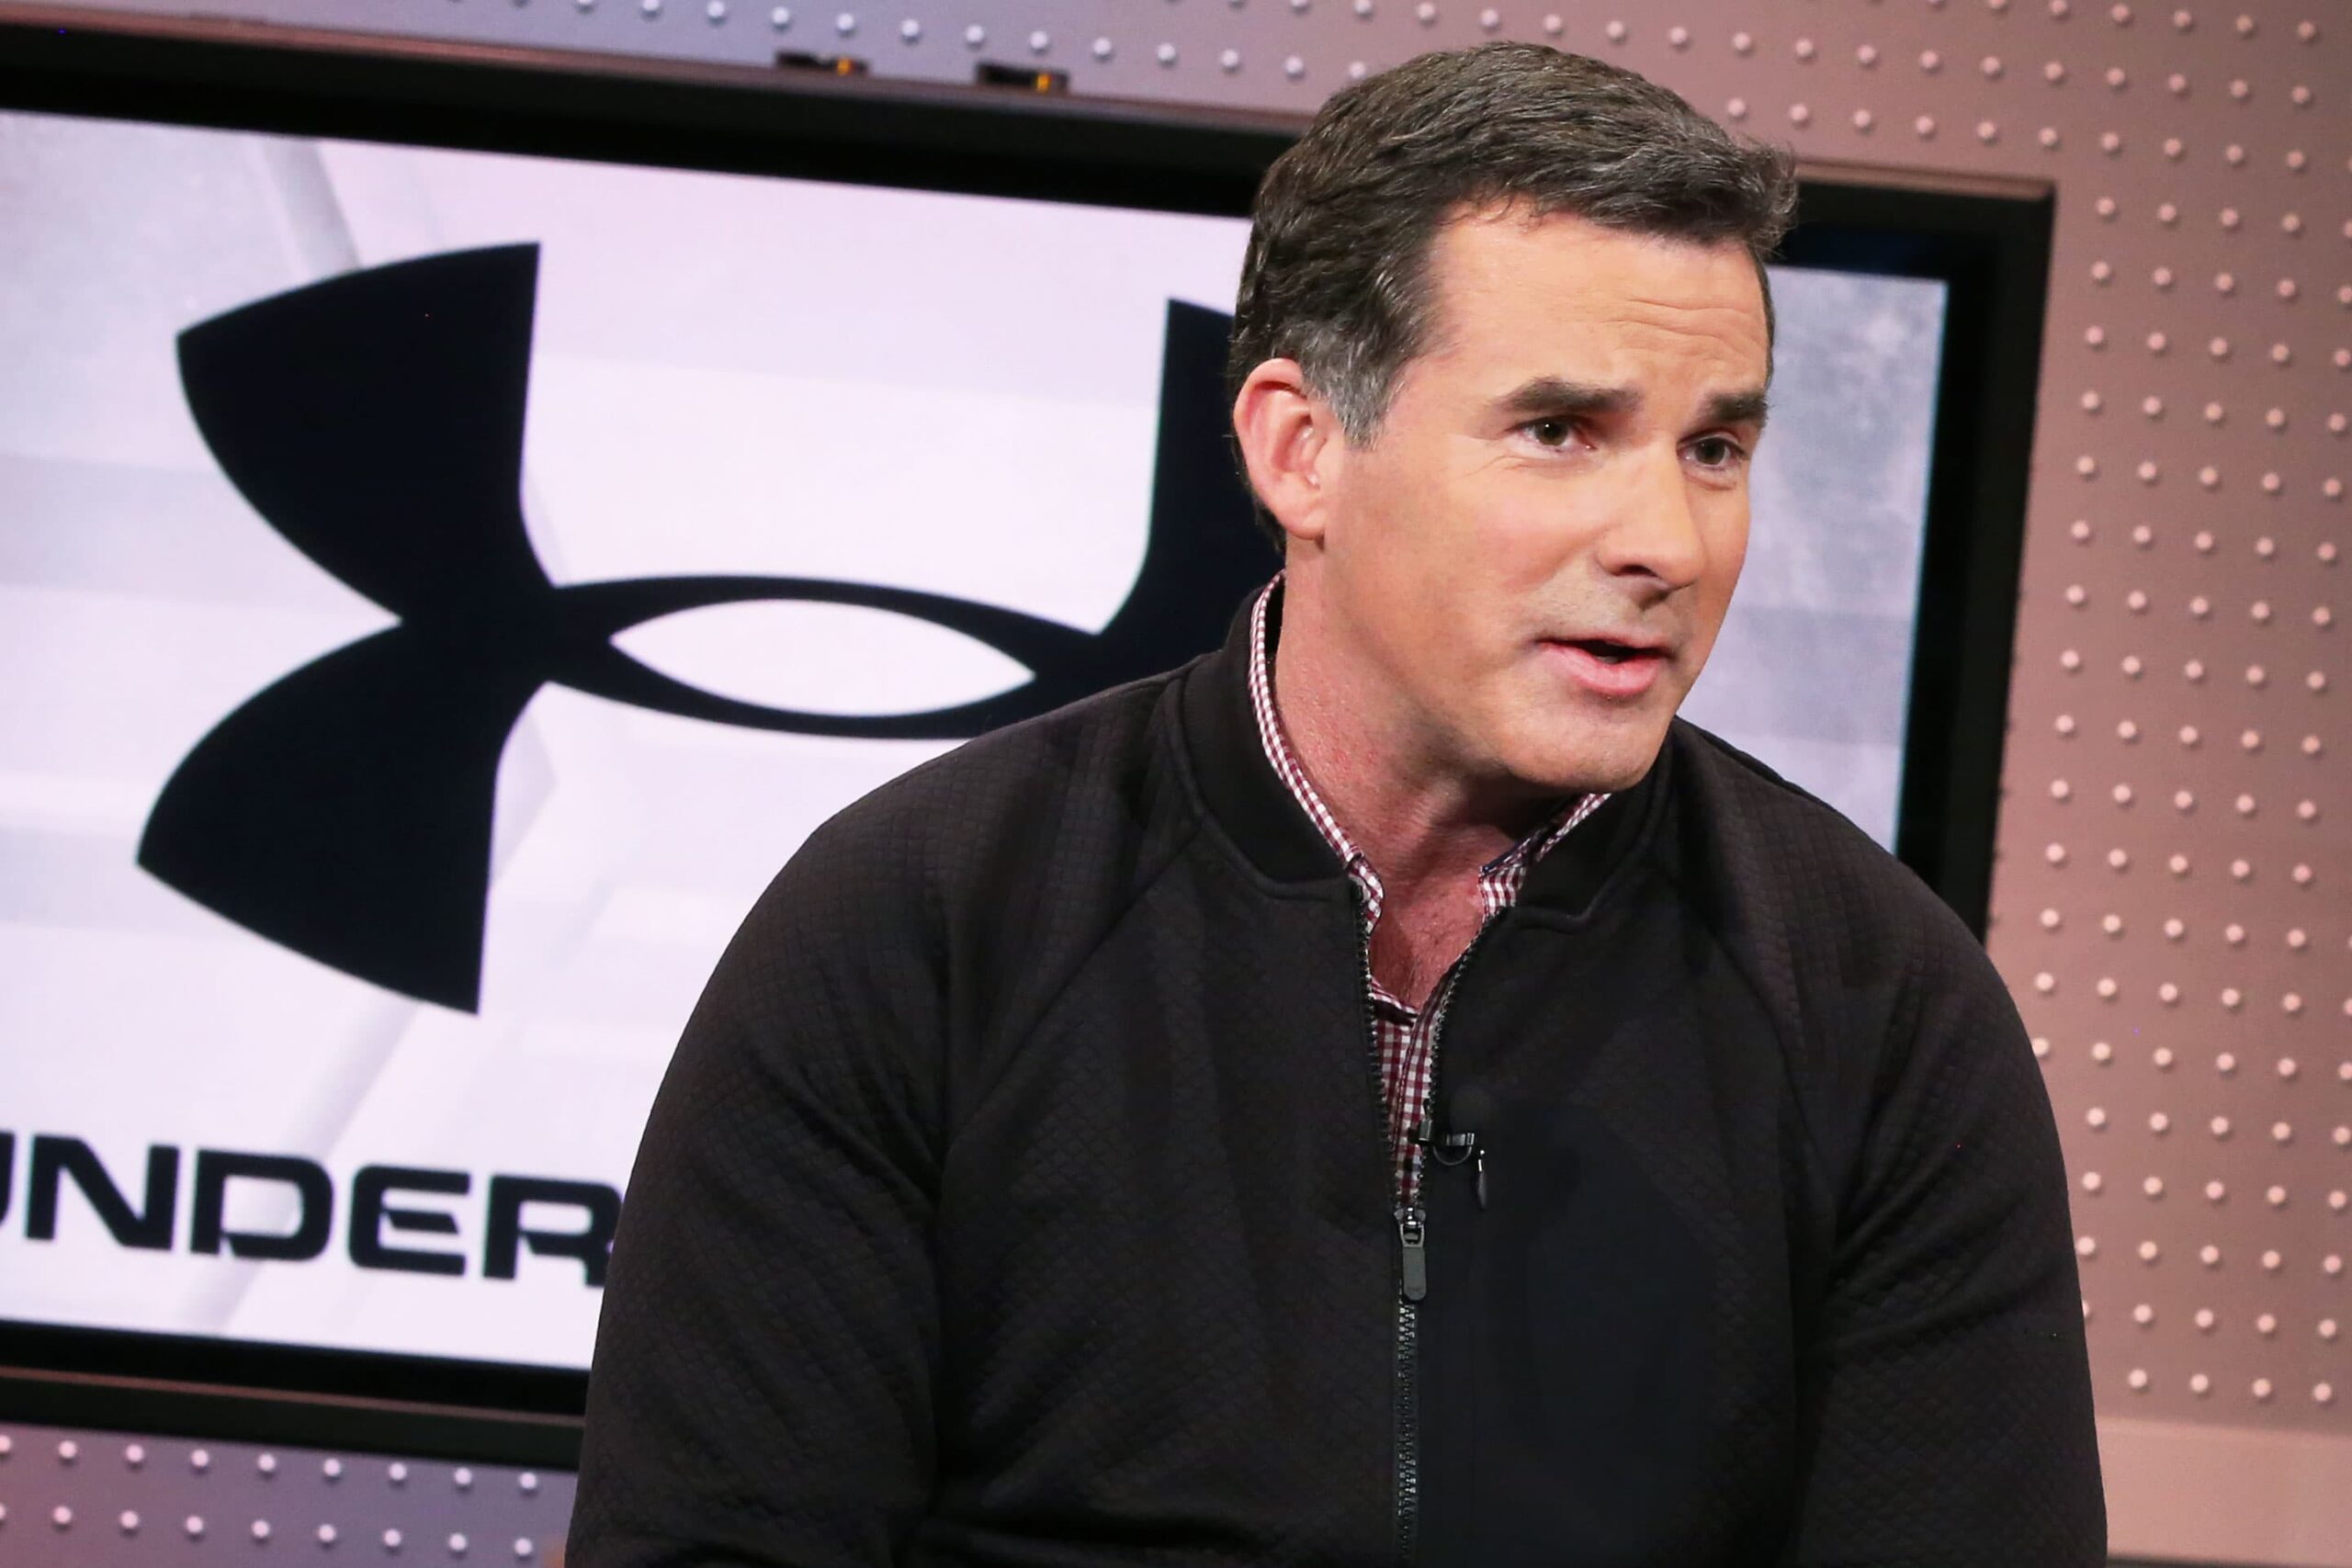 Kevin Plank Reclaims CEO Position at Under Armour in Strategic Return